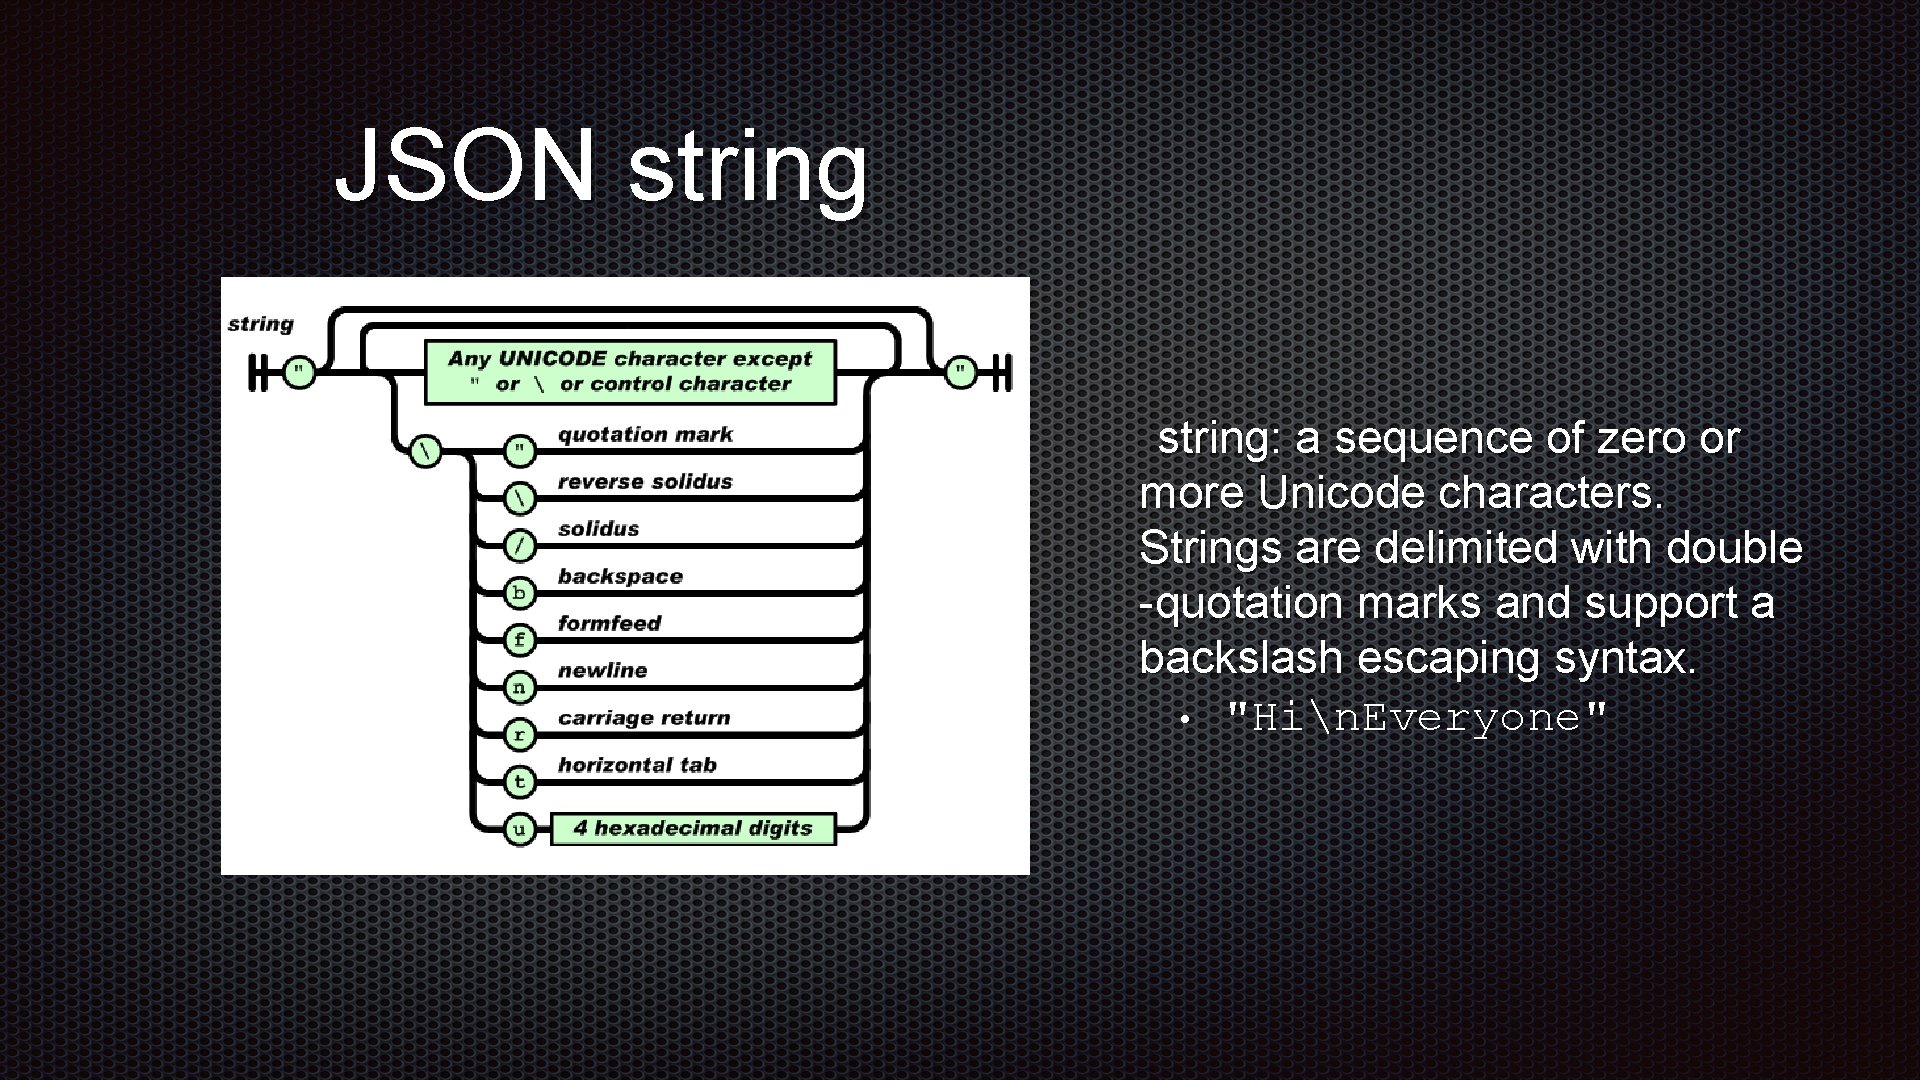 JSON string: a sequence of zero or more Unicode characters. Strings are delimited with